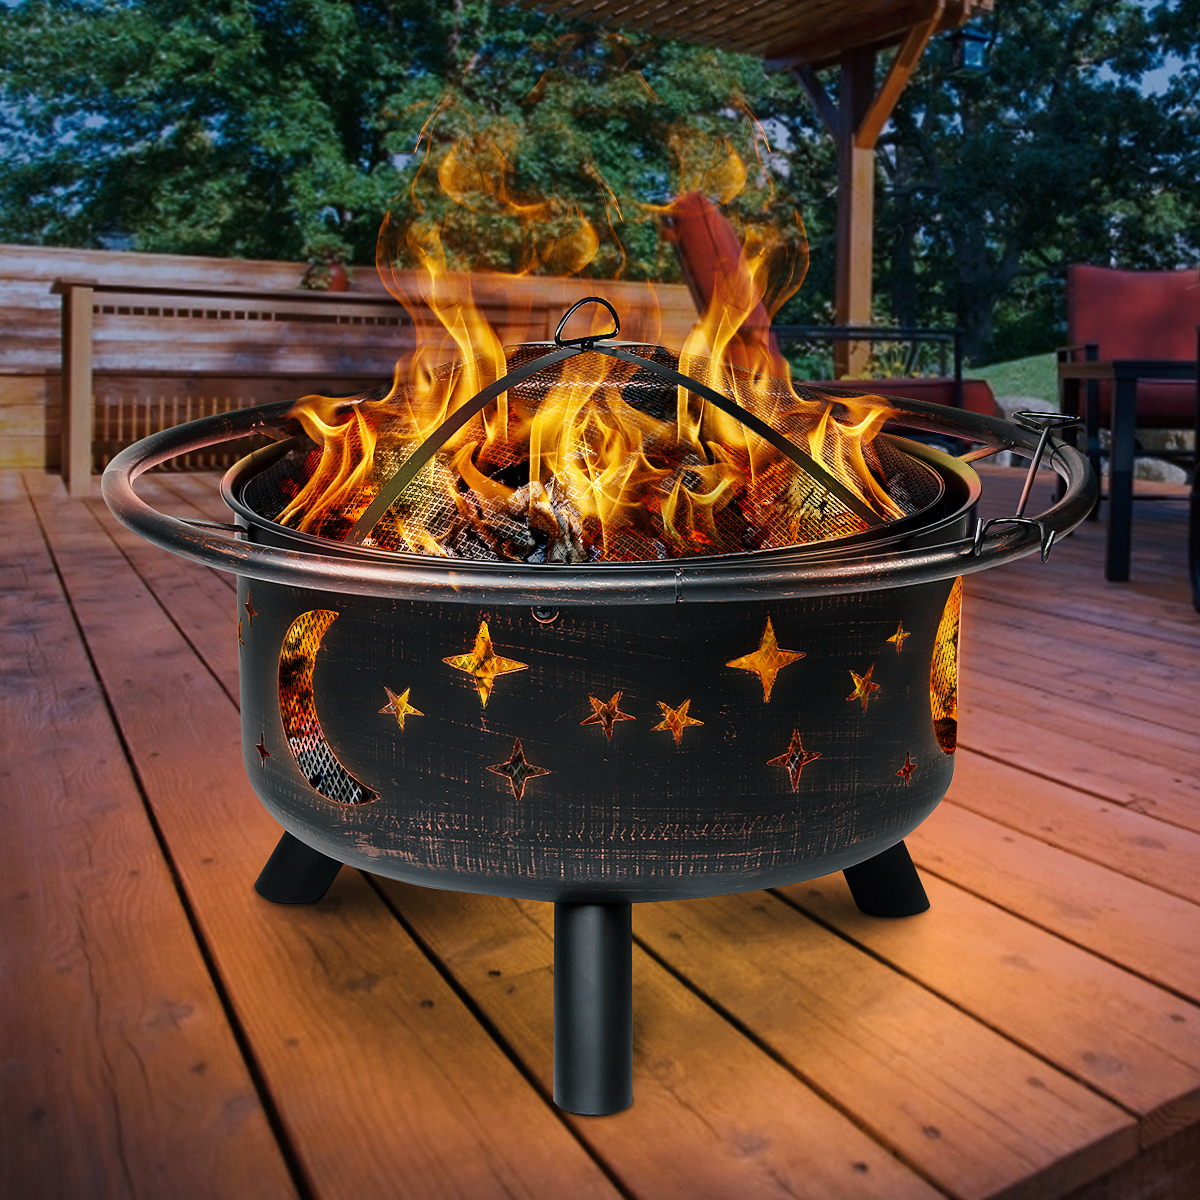 Bestgoods 30" Outdoor Fire Pit, Vintage Round Metal Firepit Bonfire Wood Burning Heater Stove Backyard Patio Garden Firepit with Spark Screen and Fireplace Poker - EASY ASSEMBLY - image 3 of 10